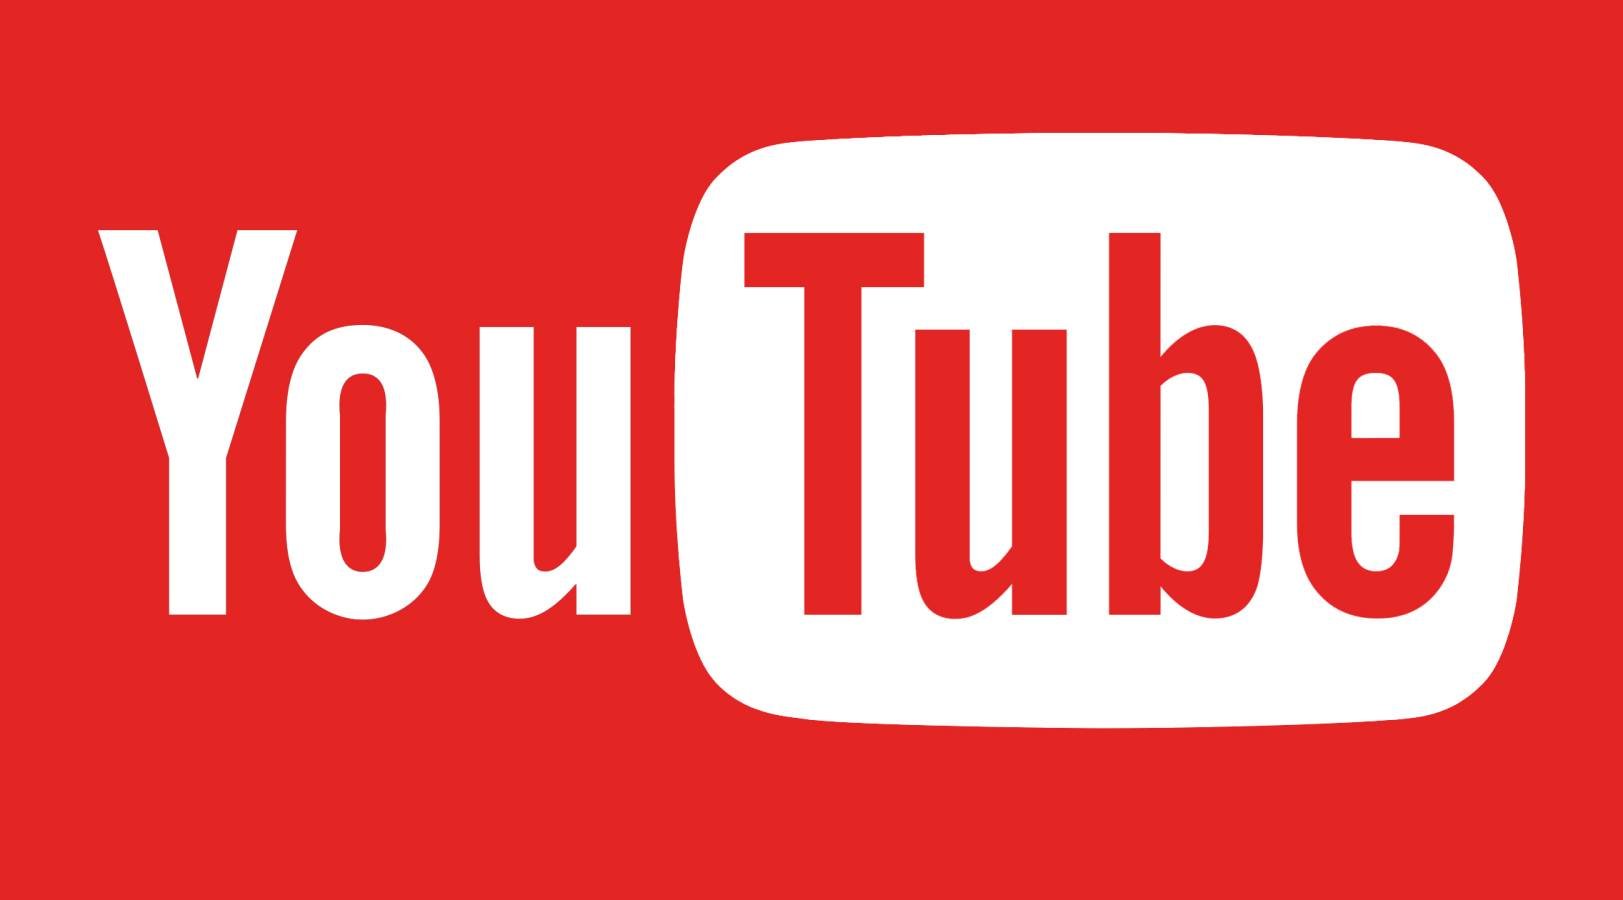 YouTube Update Brings News for iPhone and Android Phones